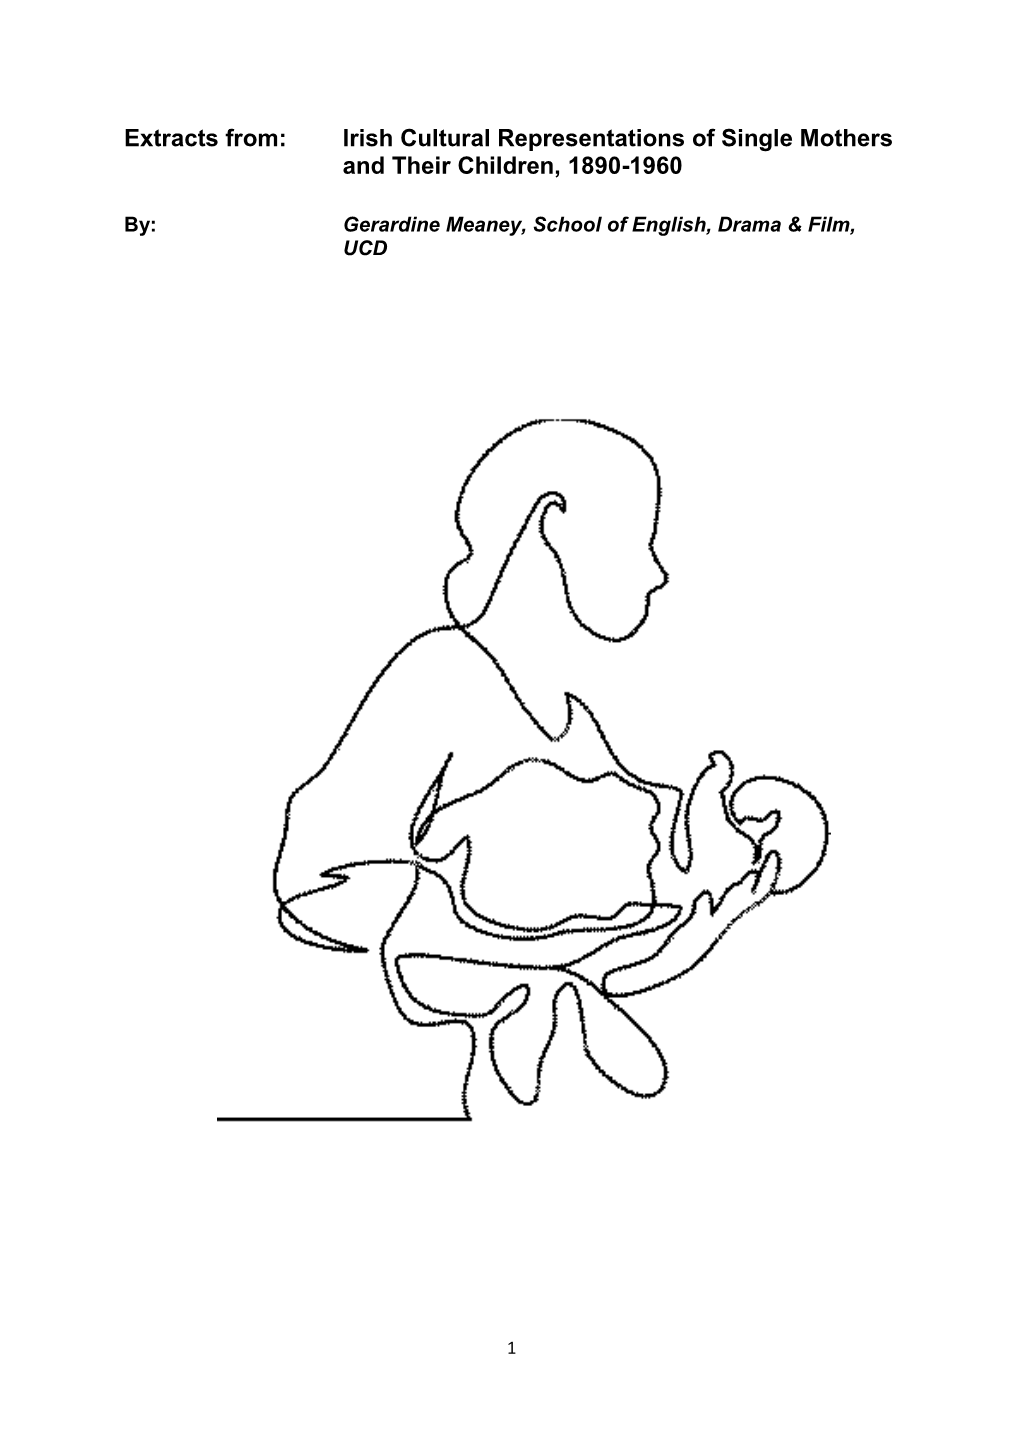 Irish Cultural Representations of Single Mothers and Their Children, 1890-1960